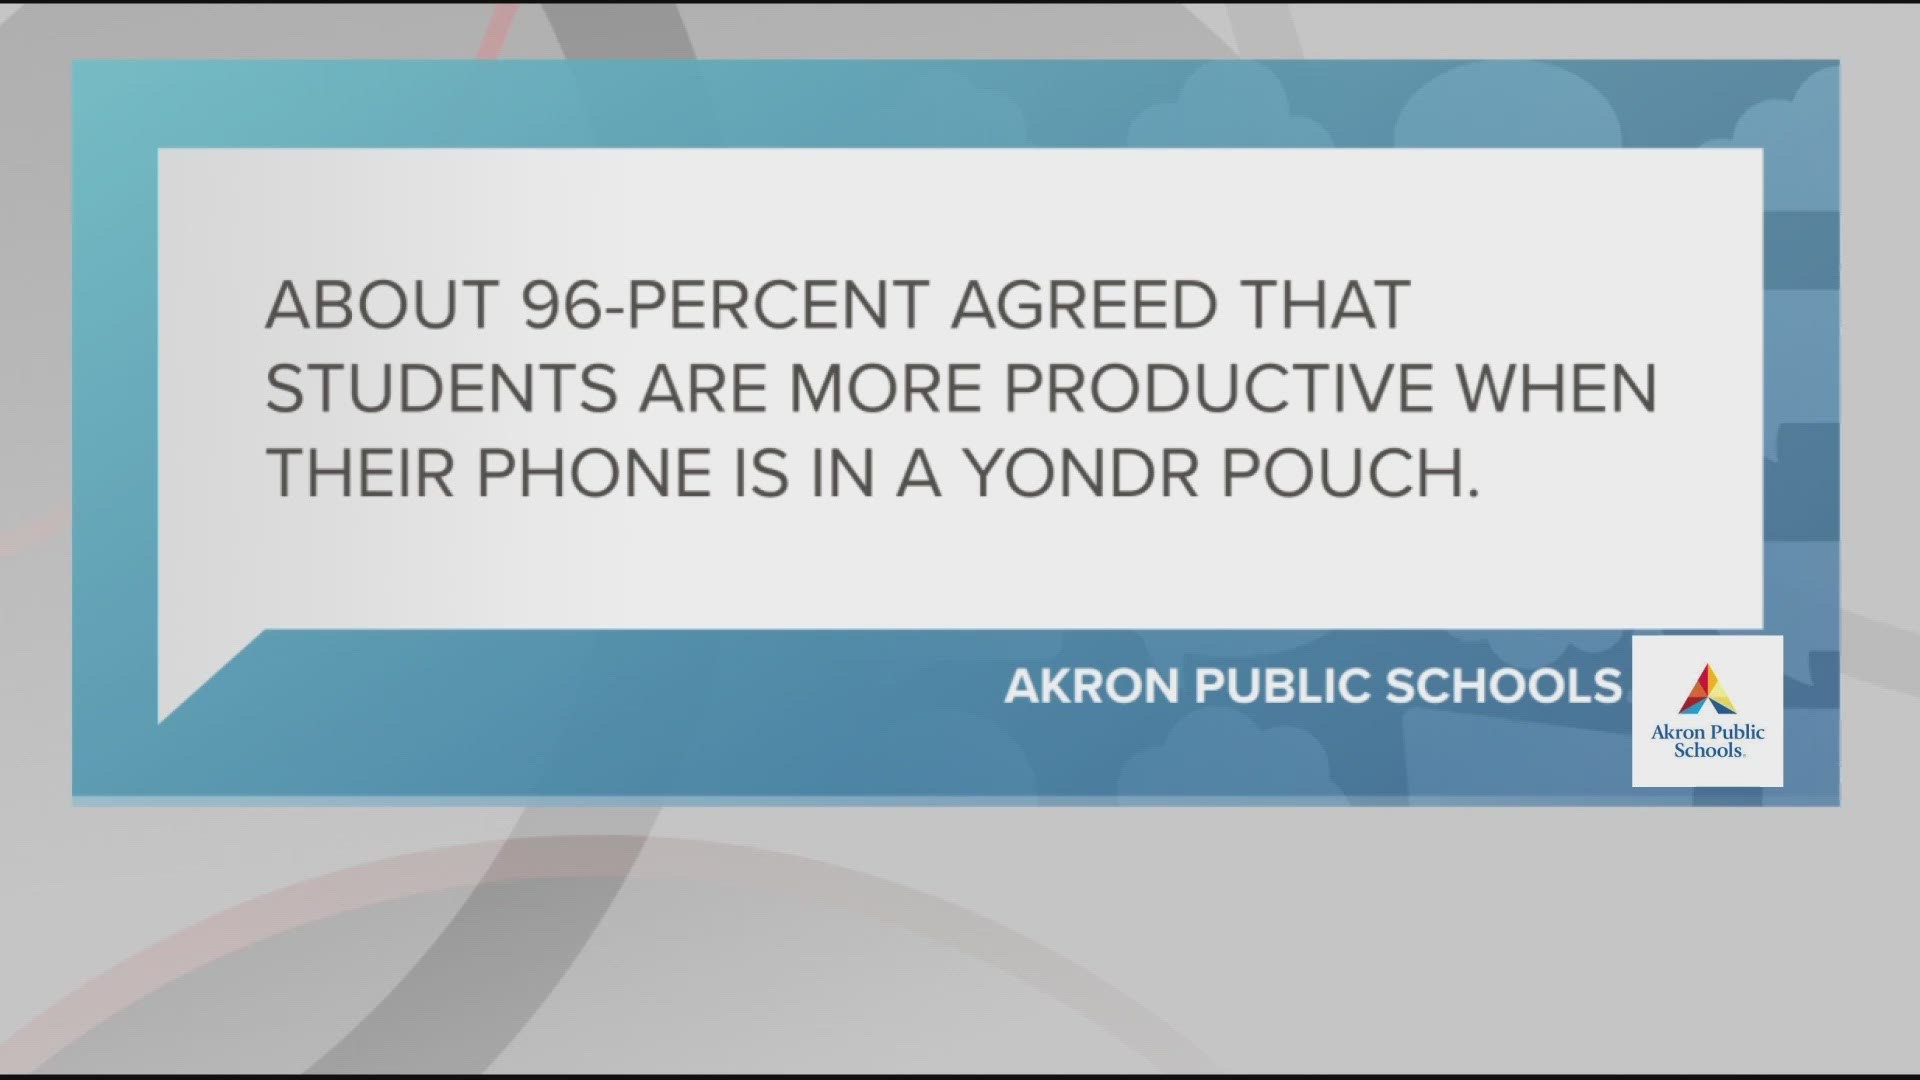 The Akron Public School Board of Ed met Monday night to vote on whether to approve the district's recommendation to remove access to phones with Yondr pouches.